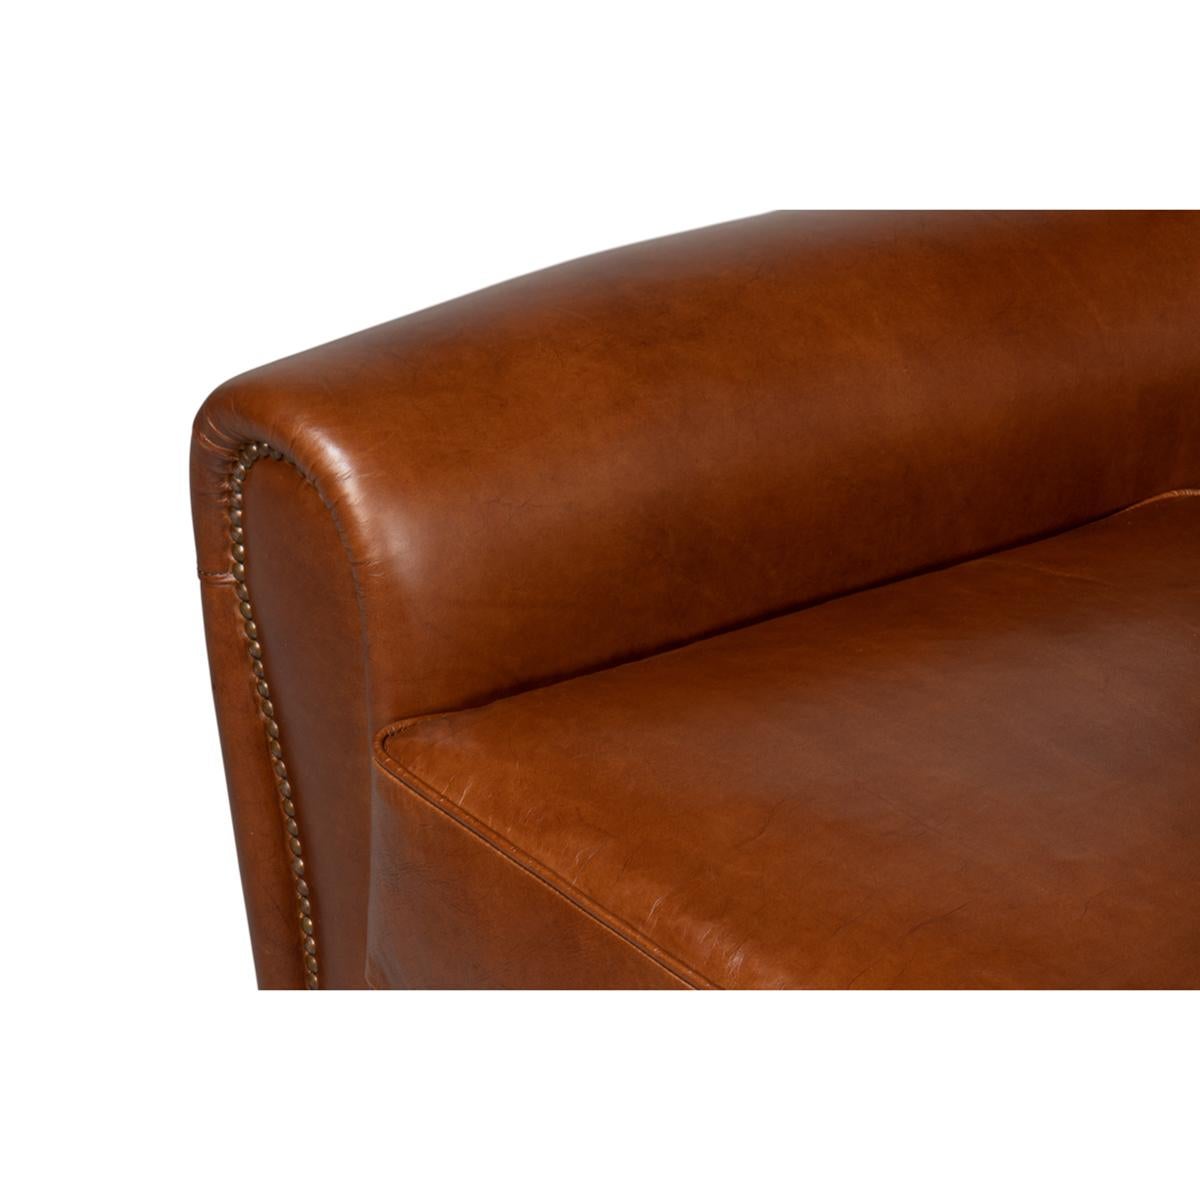 Contemporary French Art Deco Style Leather Club Chair For Sale